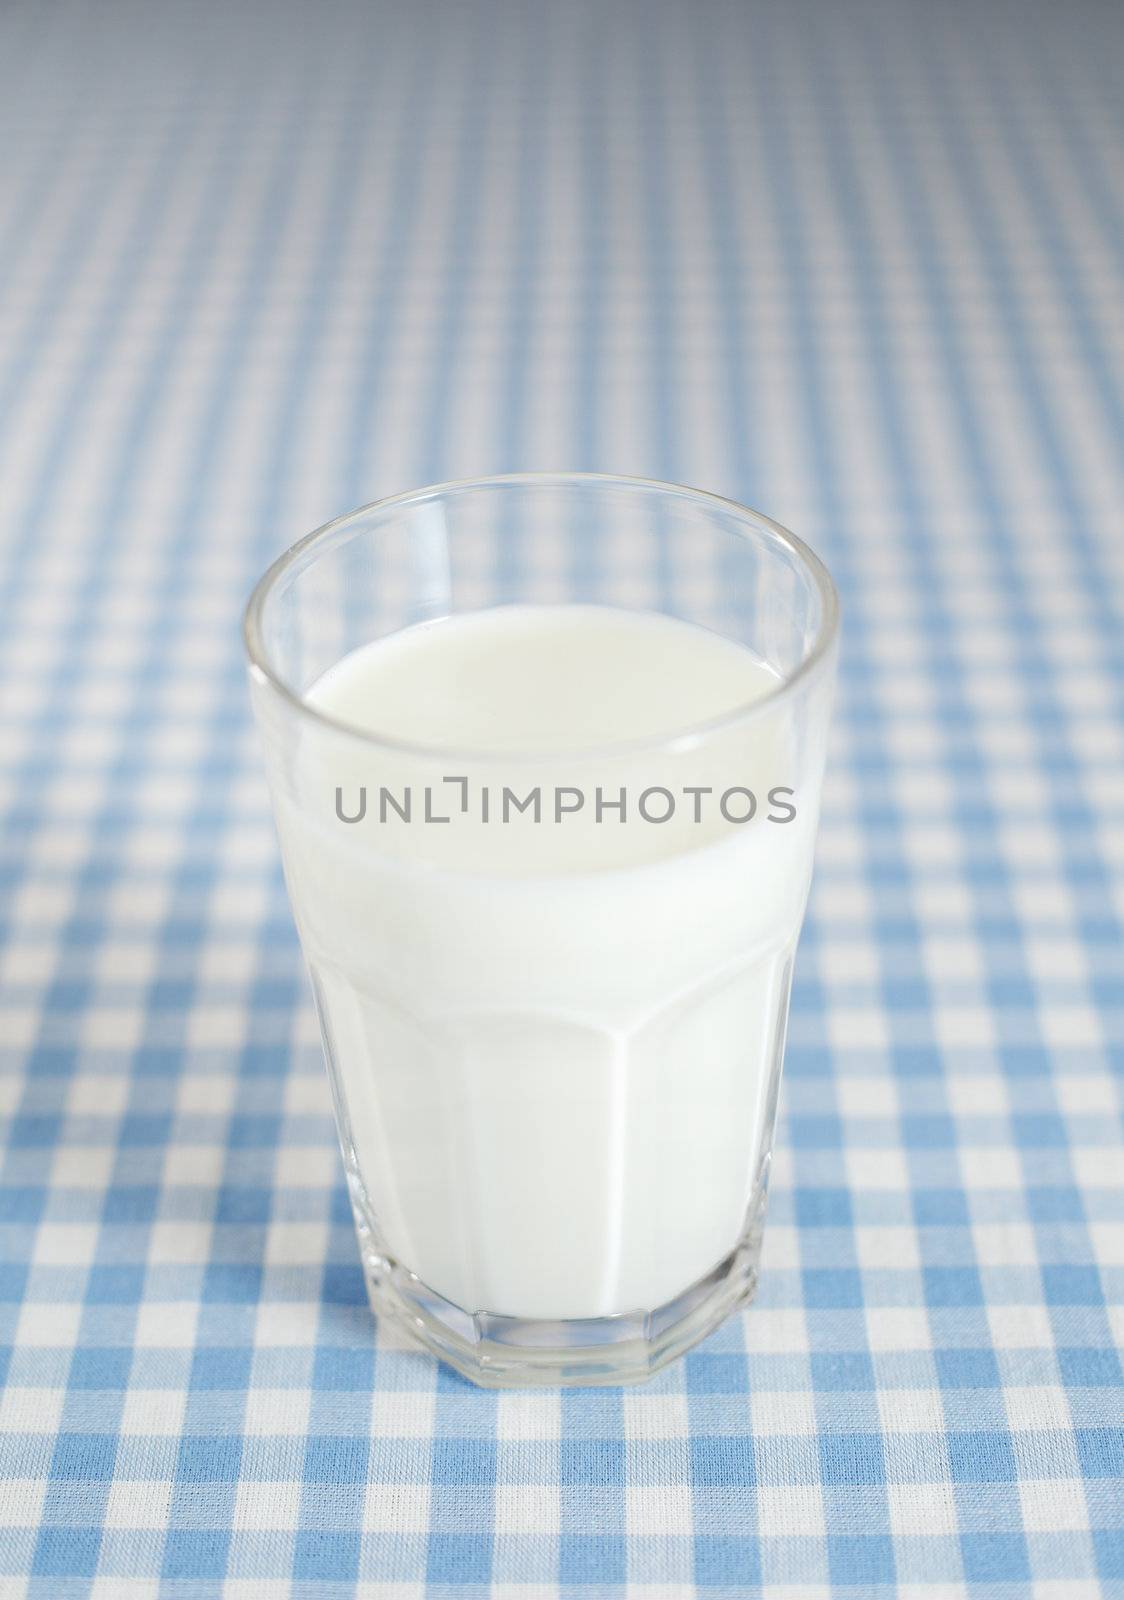 A glass of milk on plaid tablecloth